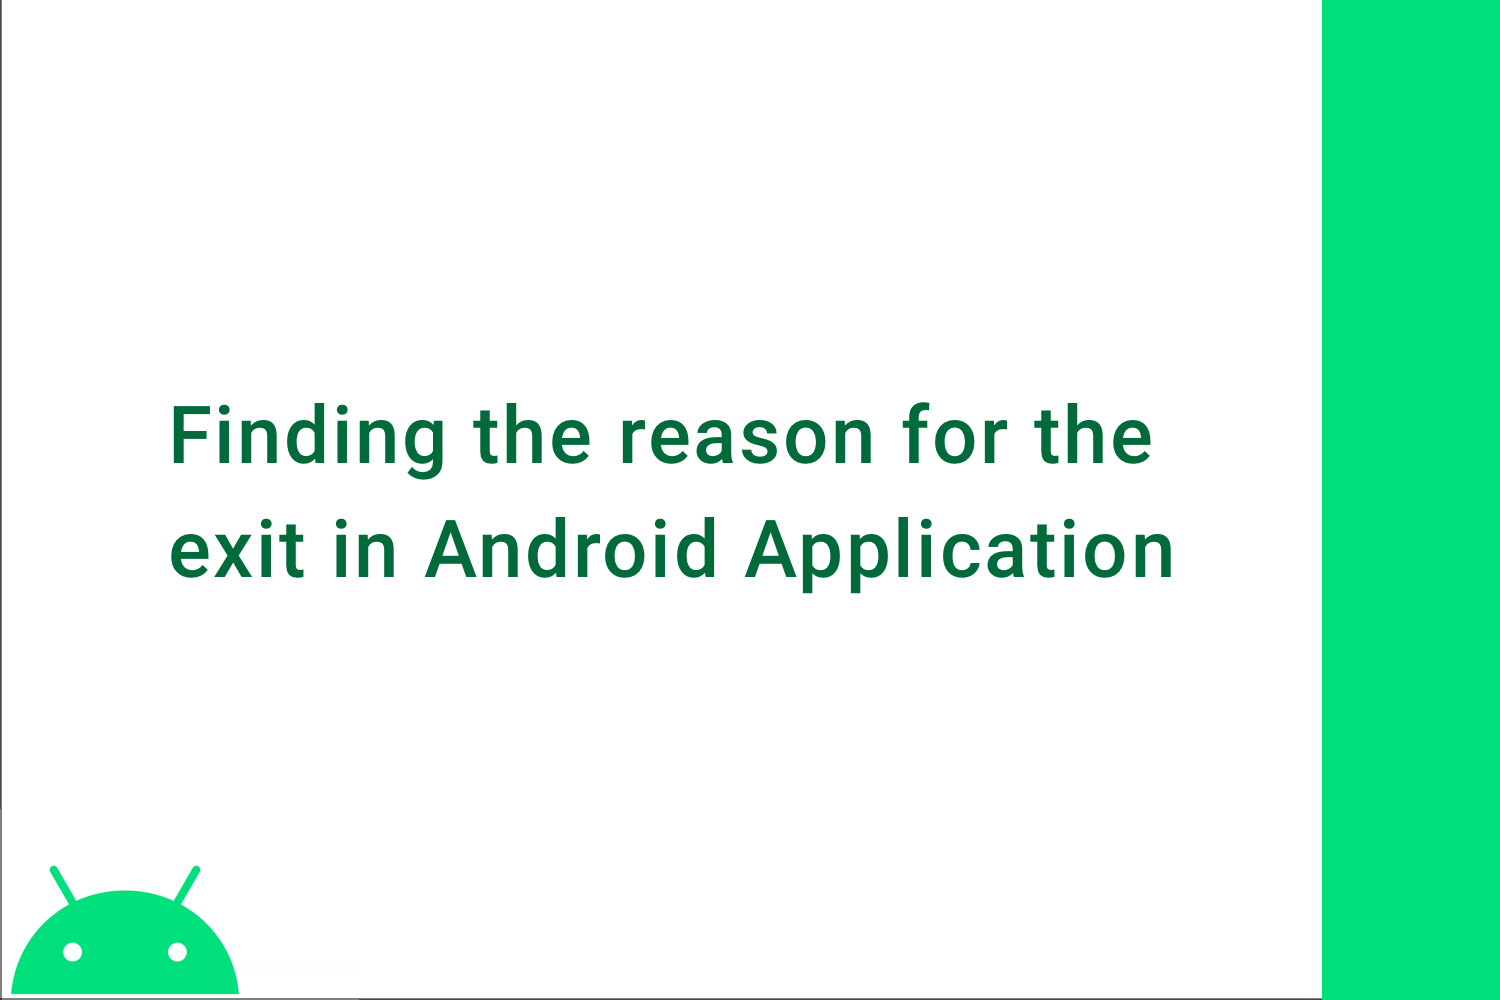 Finding the reason of exit in Android Application